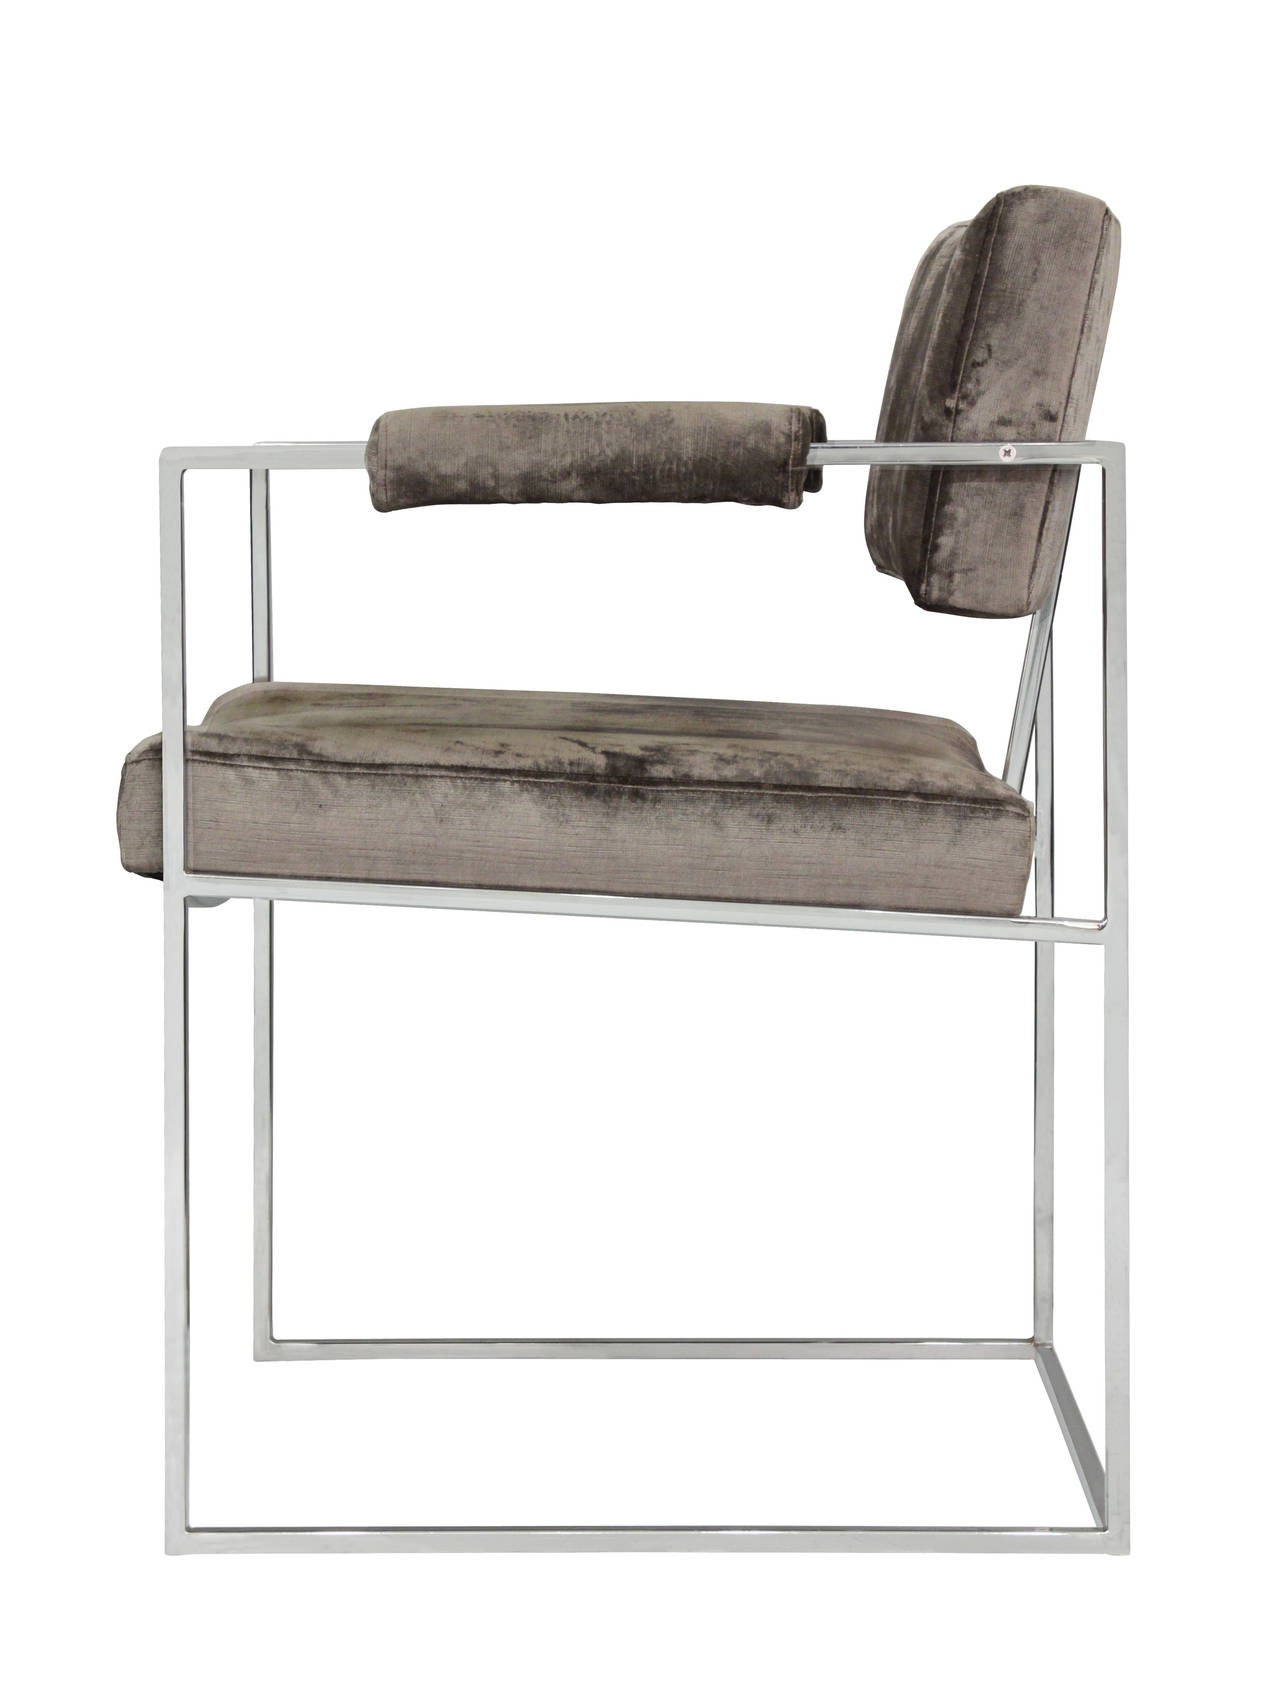 Mid-Century Modern Pair of Chic Chairs with Chrome Frames by Milo Baugman